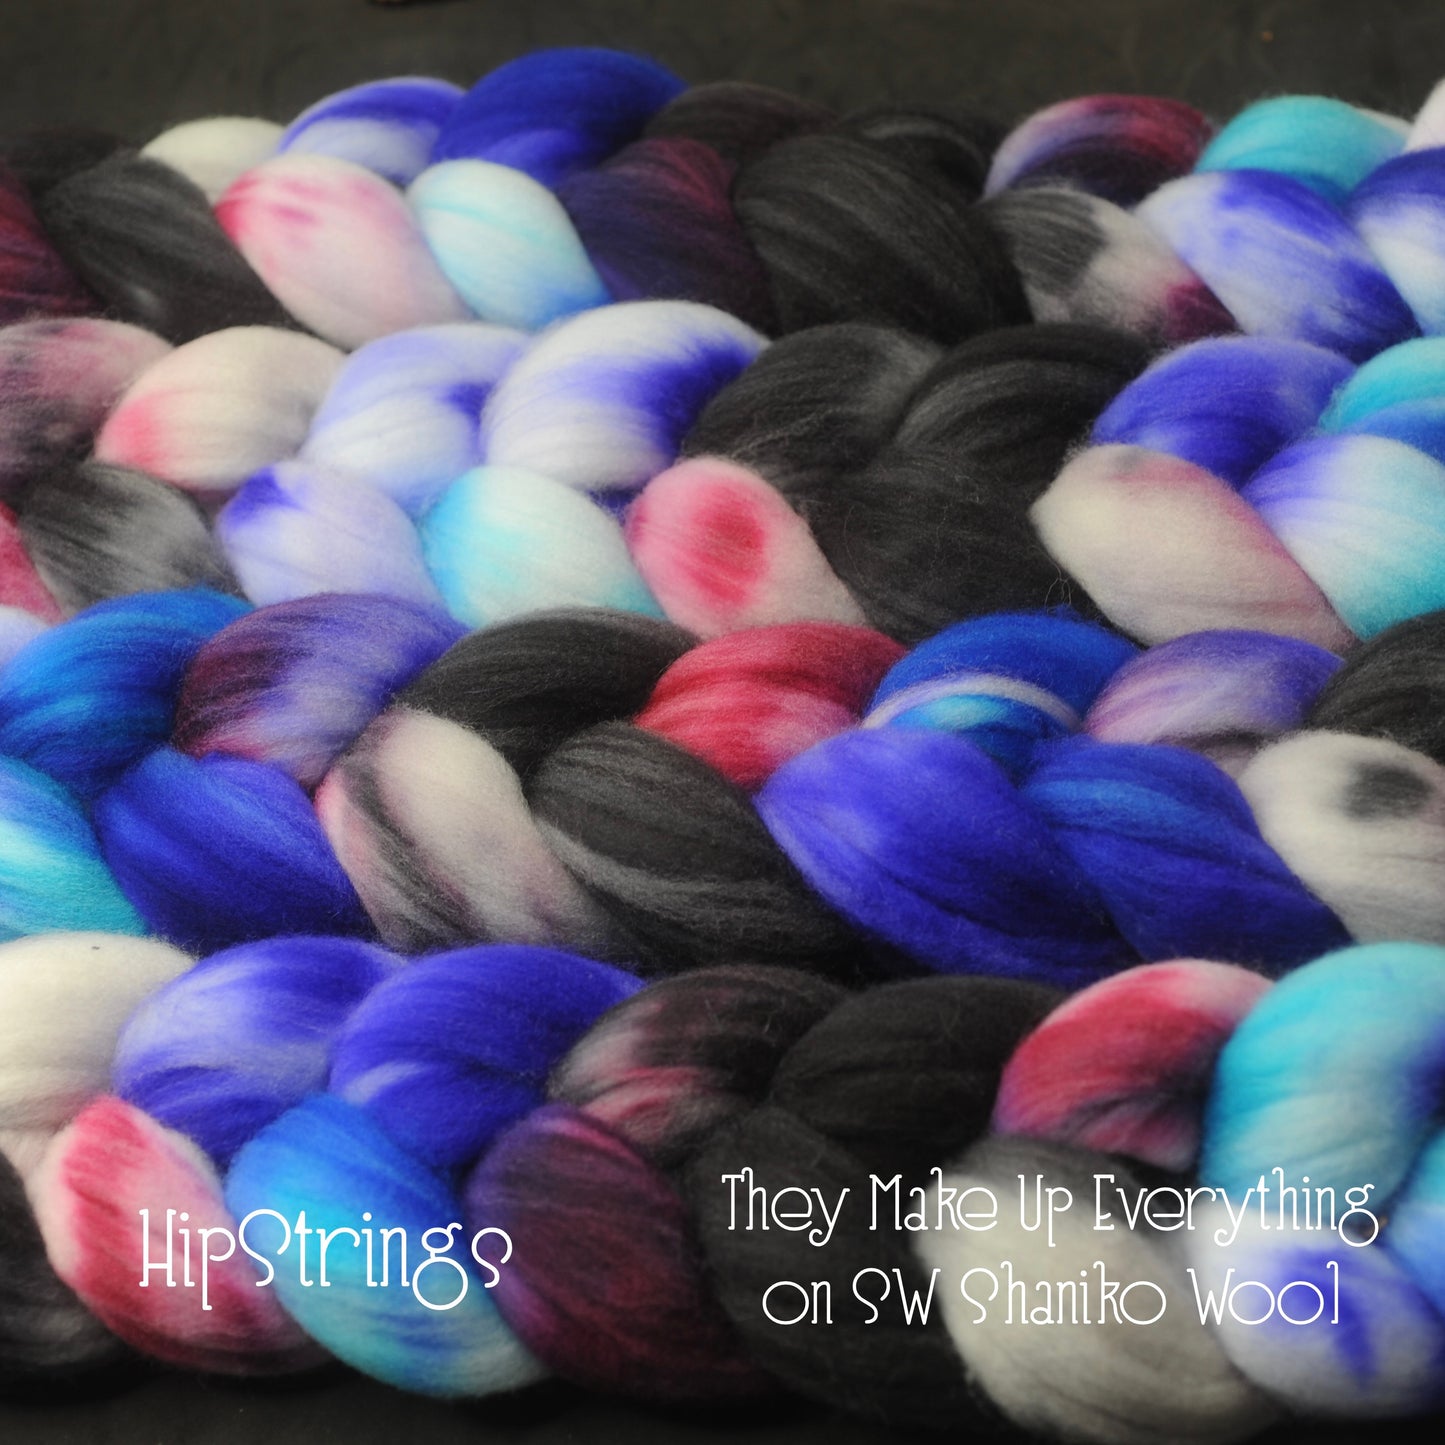 They Make Up Everything on Hand Dyed SW Shaniko Wool Combed Top - 4 oz